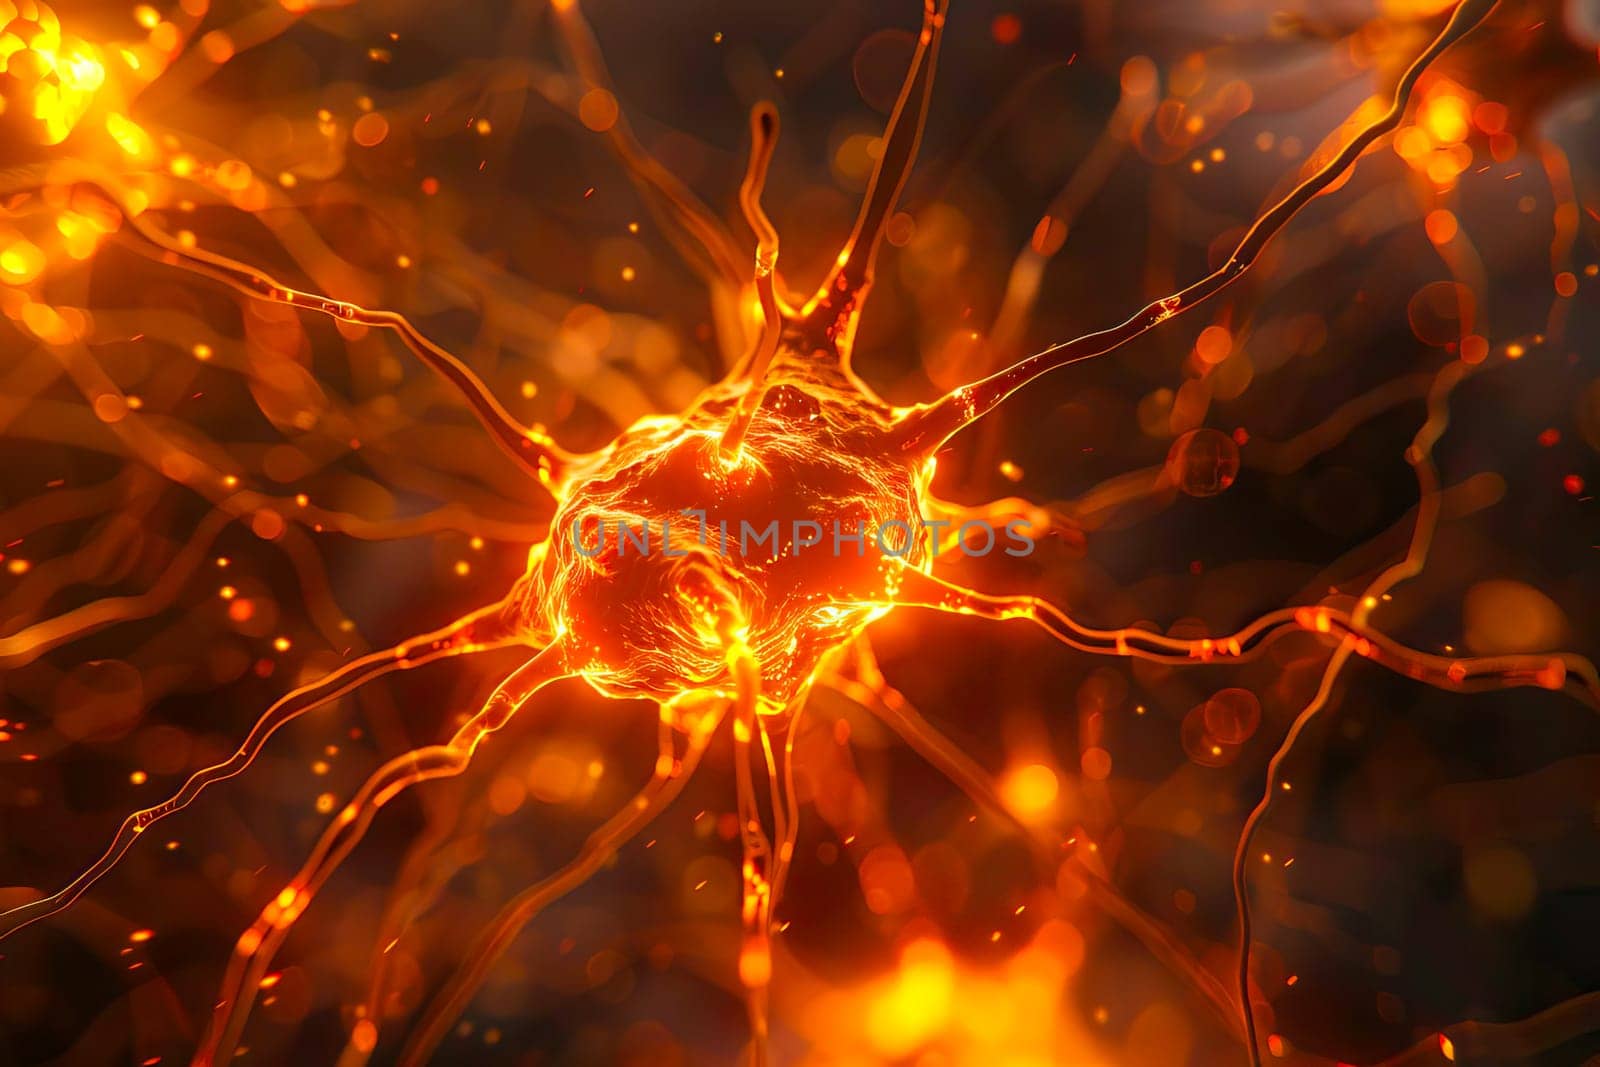 Close-up view showcasing the intricate network of firing neurons.